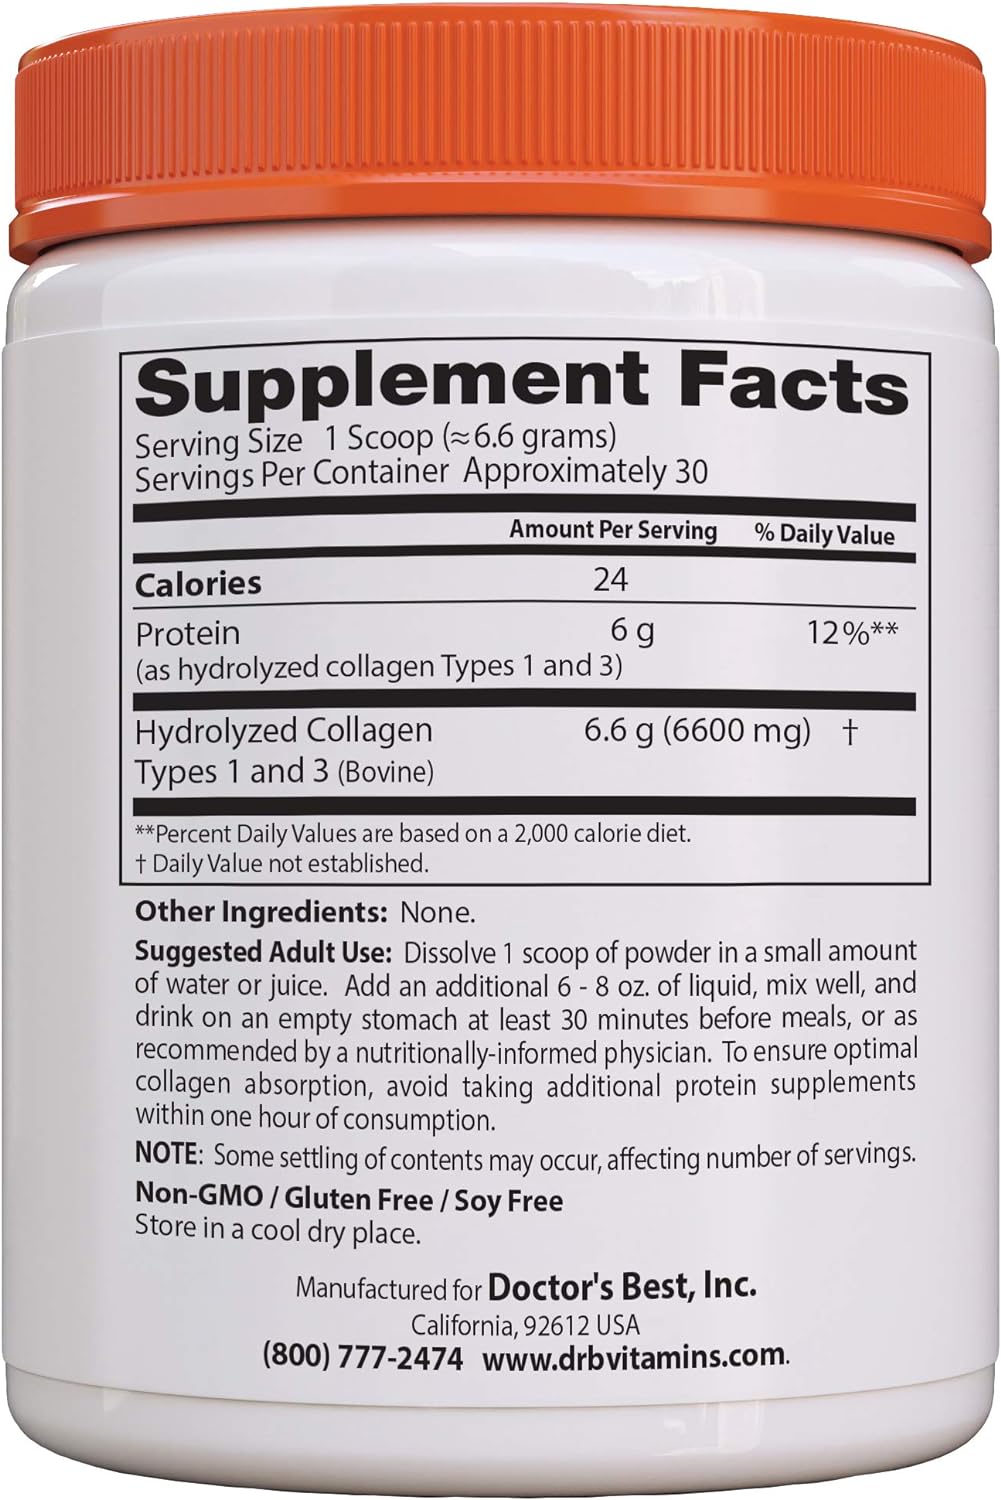  Doctors Best Pure Collagen Types 1 & 3, Promotes Healthy Skin Hair & Nails  Bone & Joint Support, 7.1 Ounce (Pack of 1)